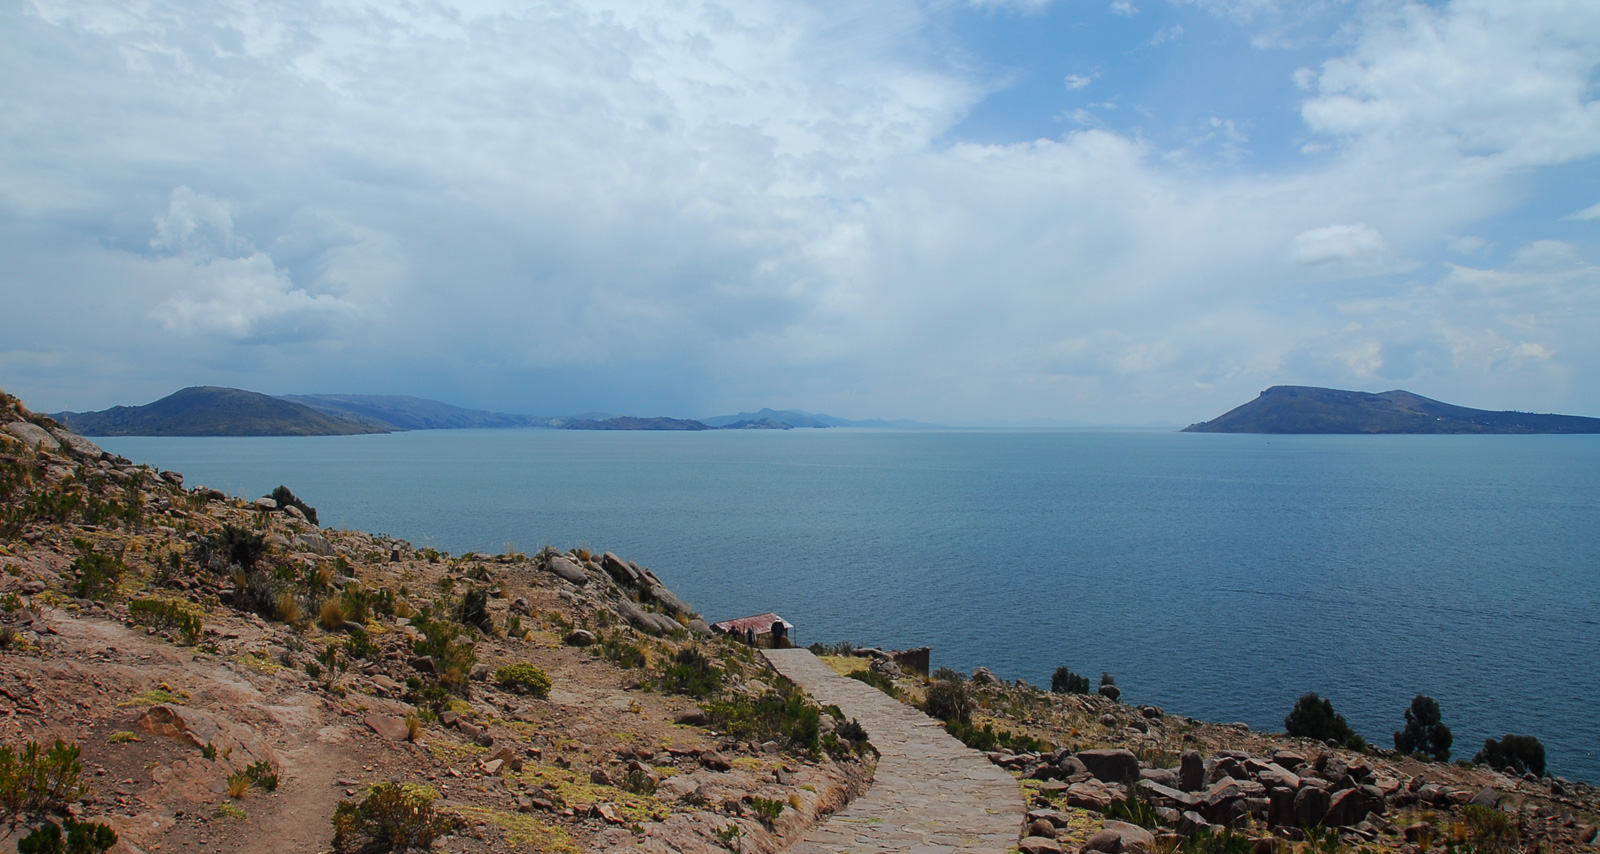 Lake Titicaca [18 mm, 1/320 sec at f / 9.0, ISO 100]